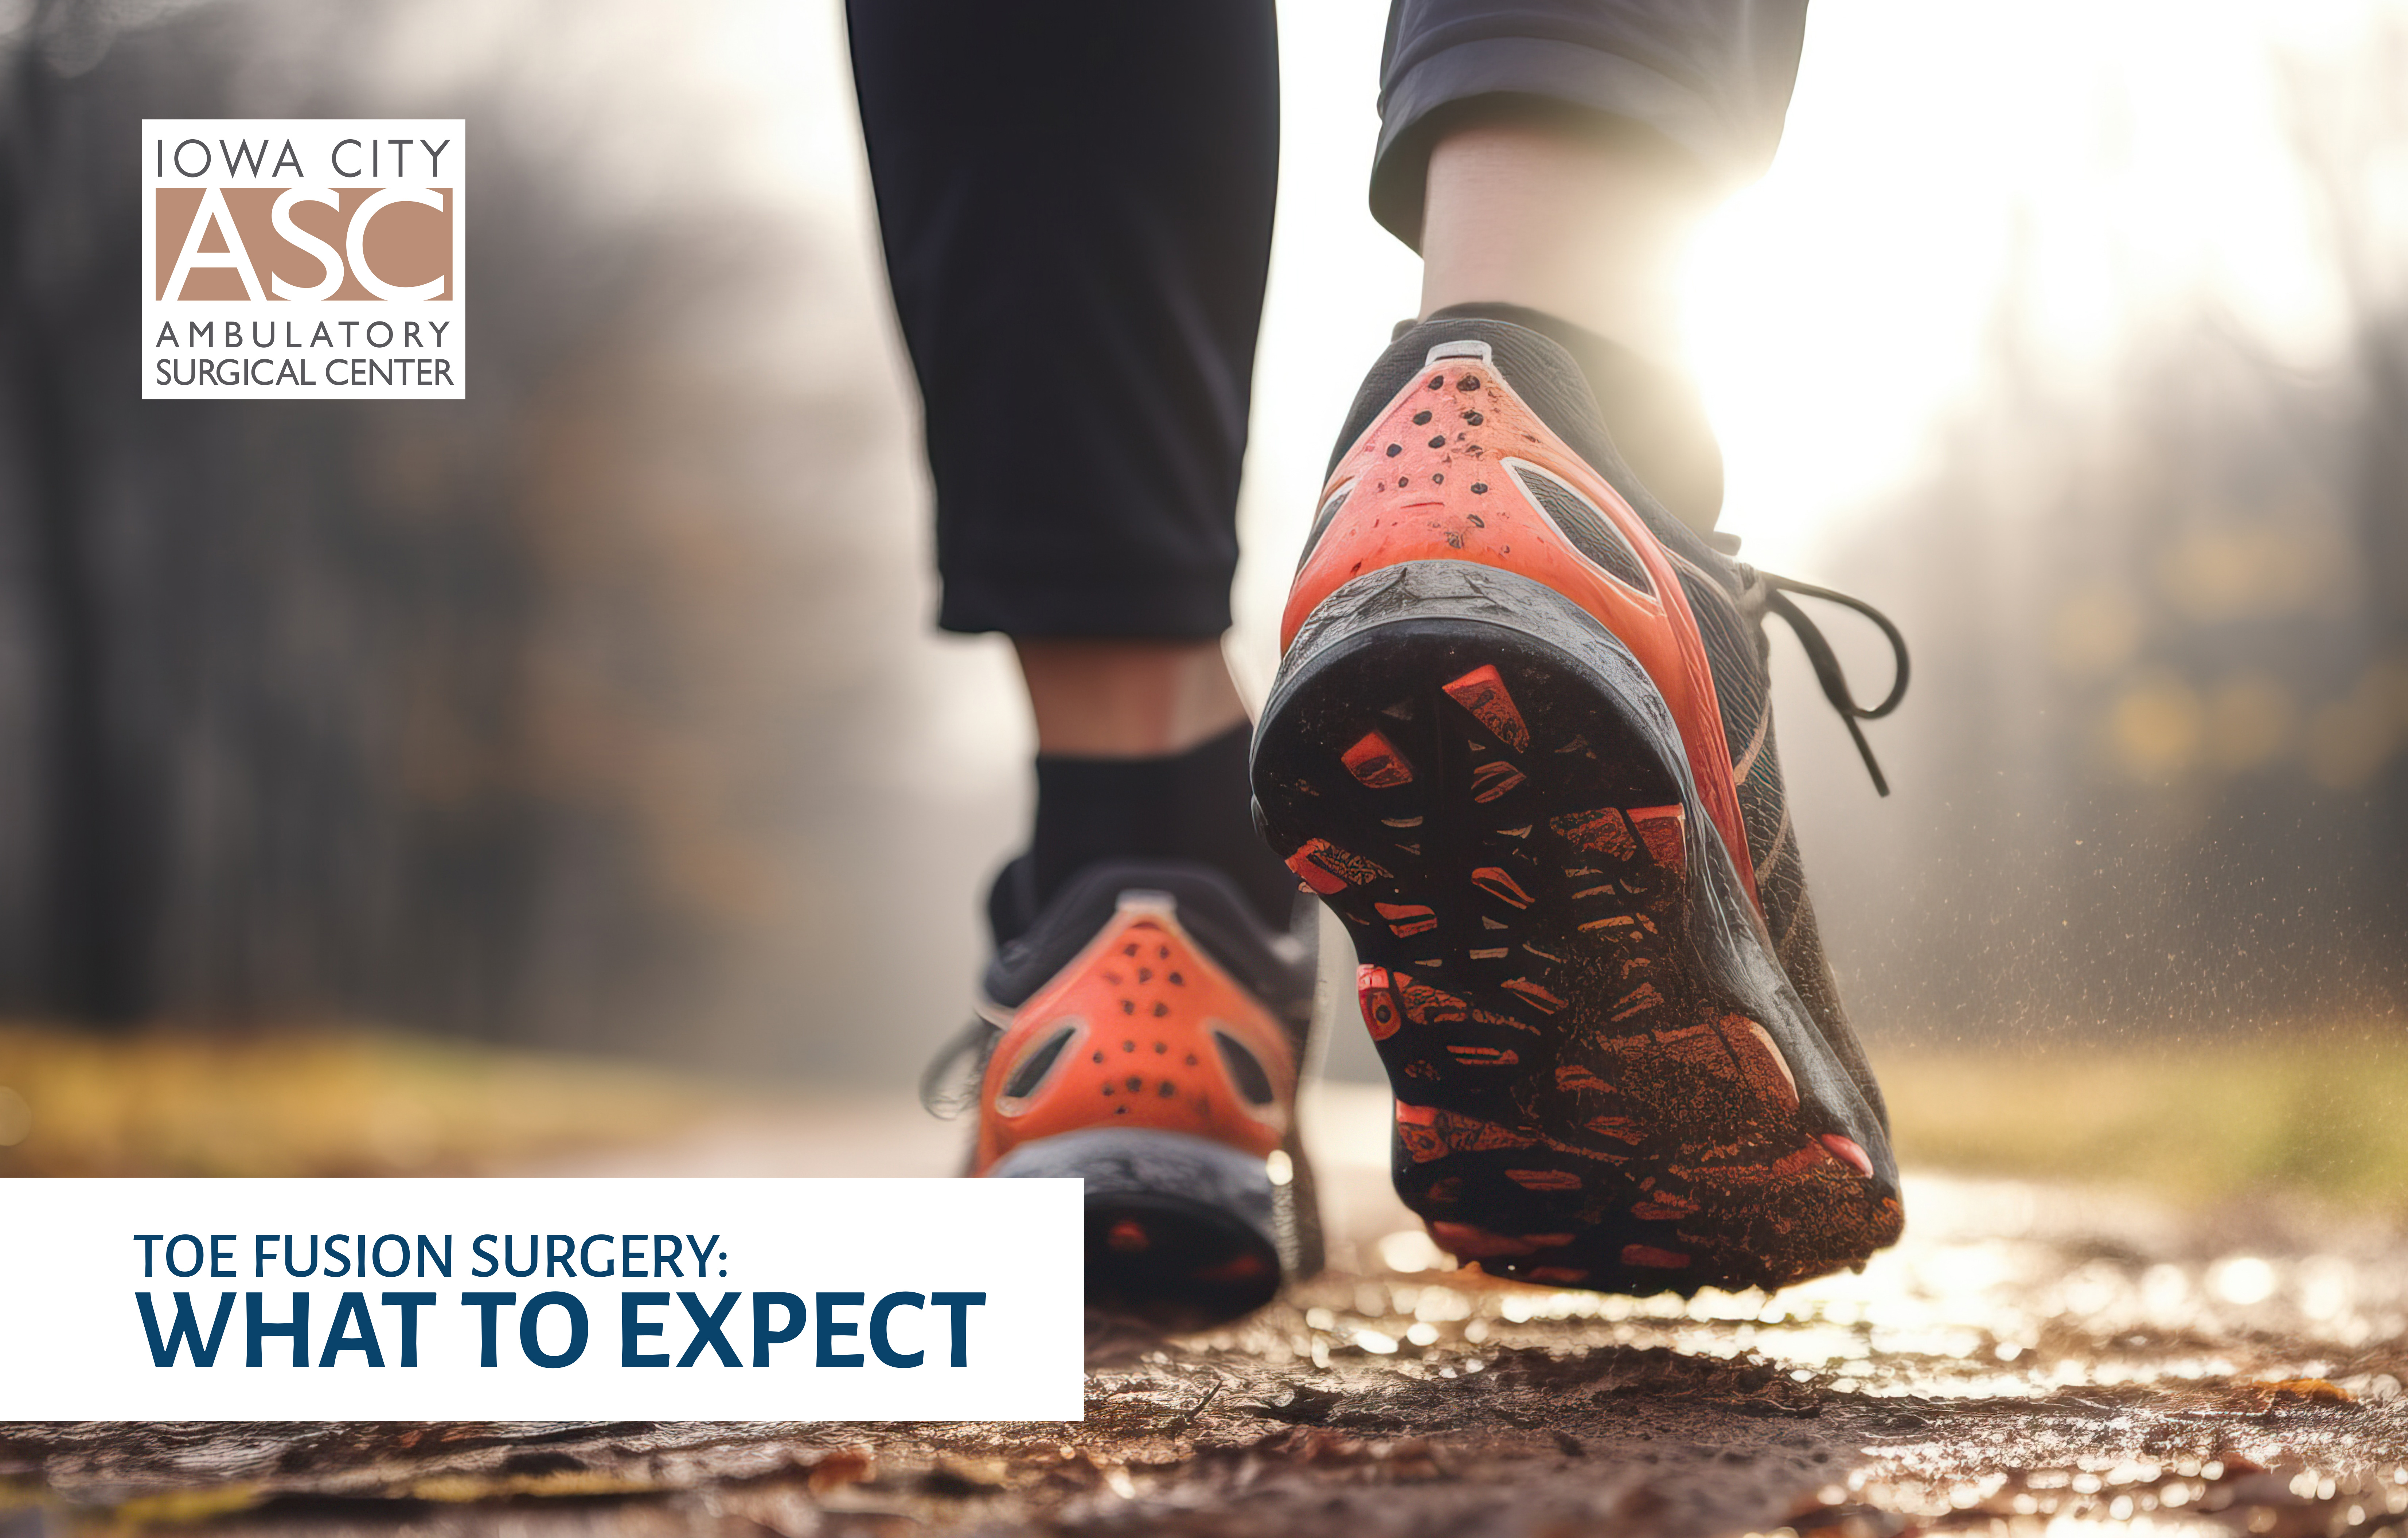 Toe Fusion Surgery: What to Expect